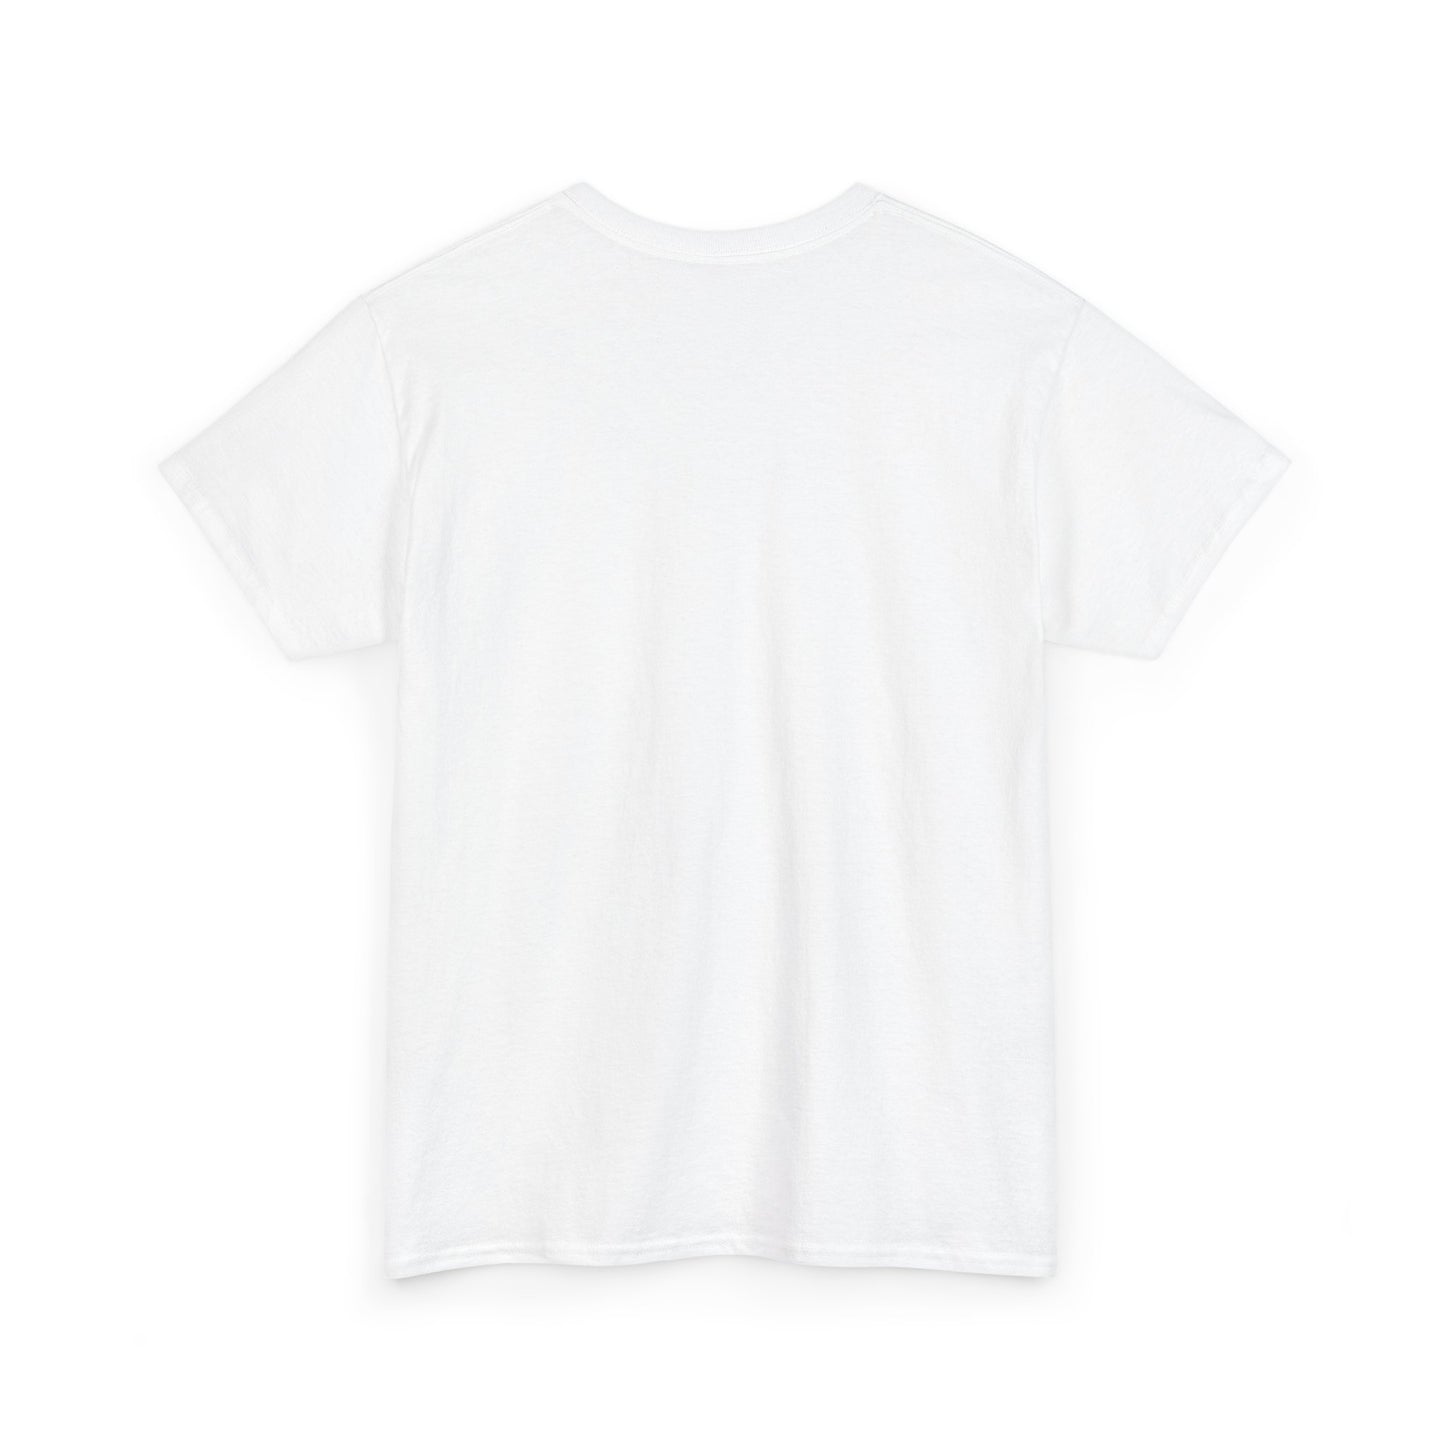 Unisex Heavy Cotton Tee Many colors and sizes by Refn